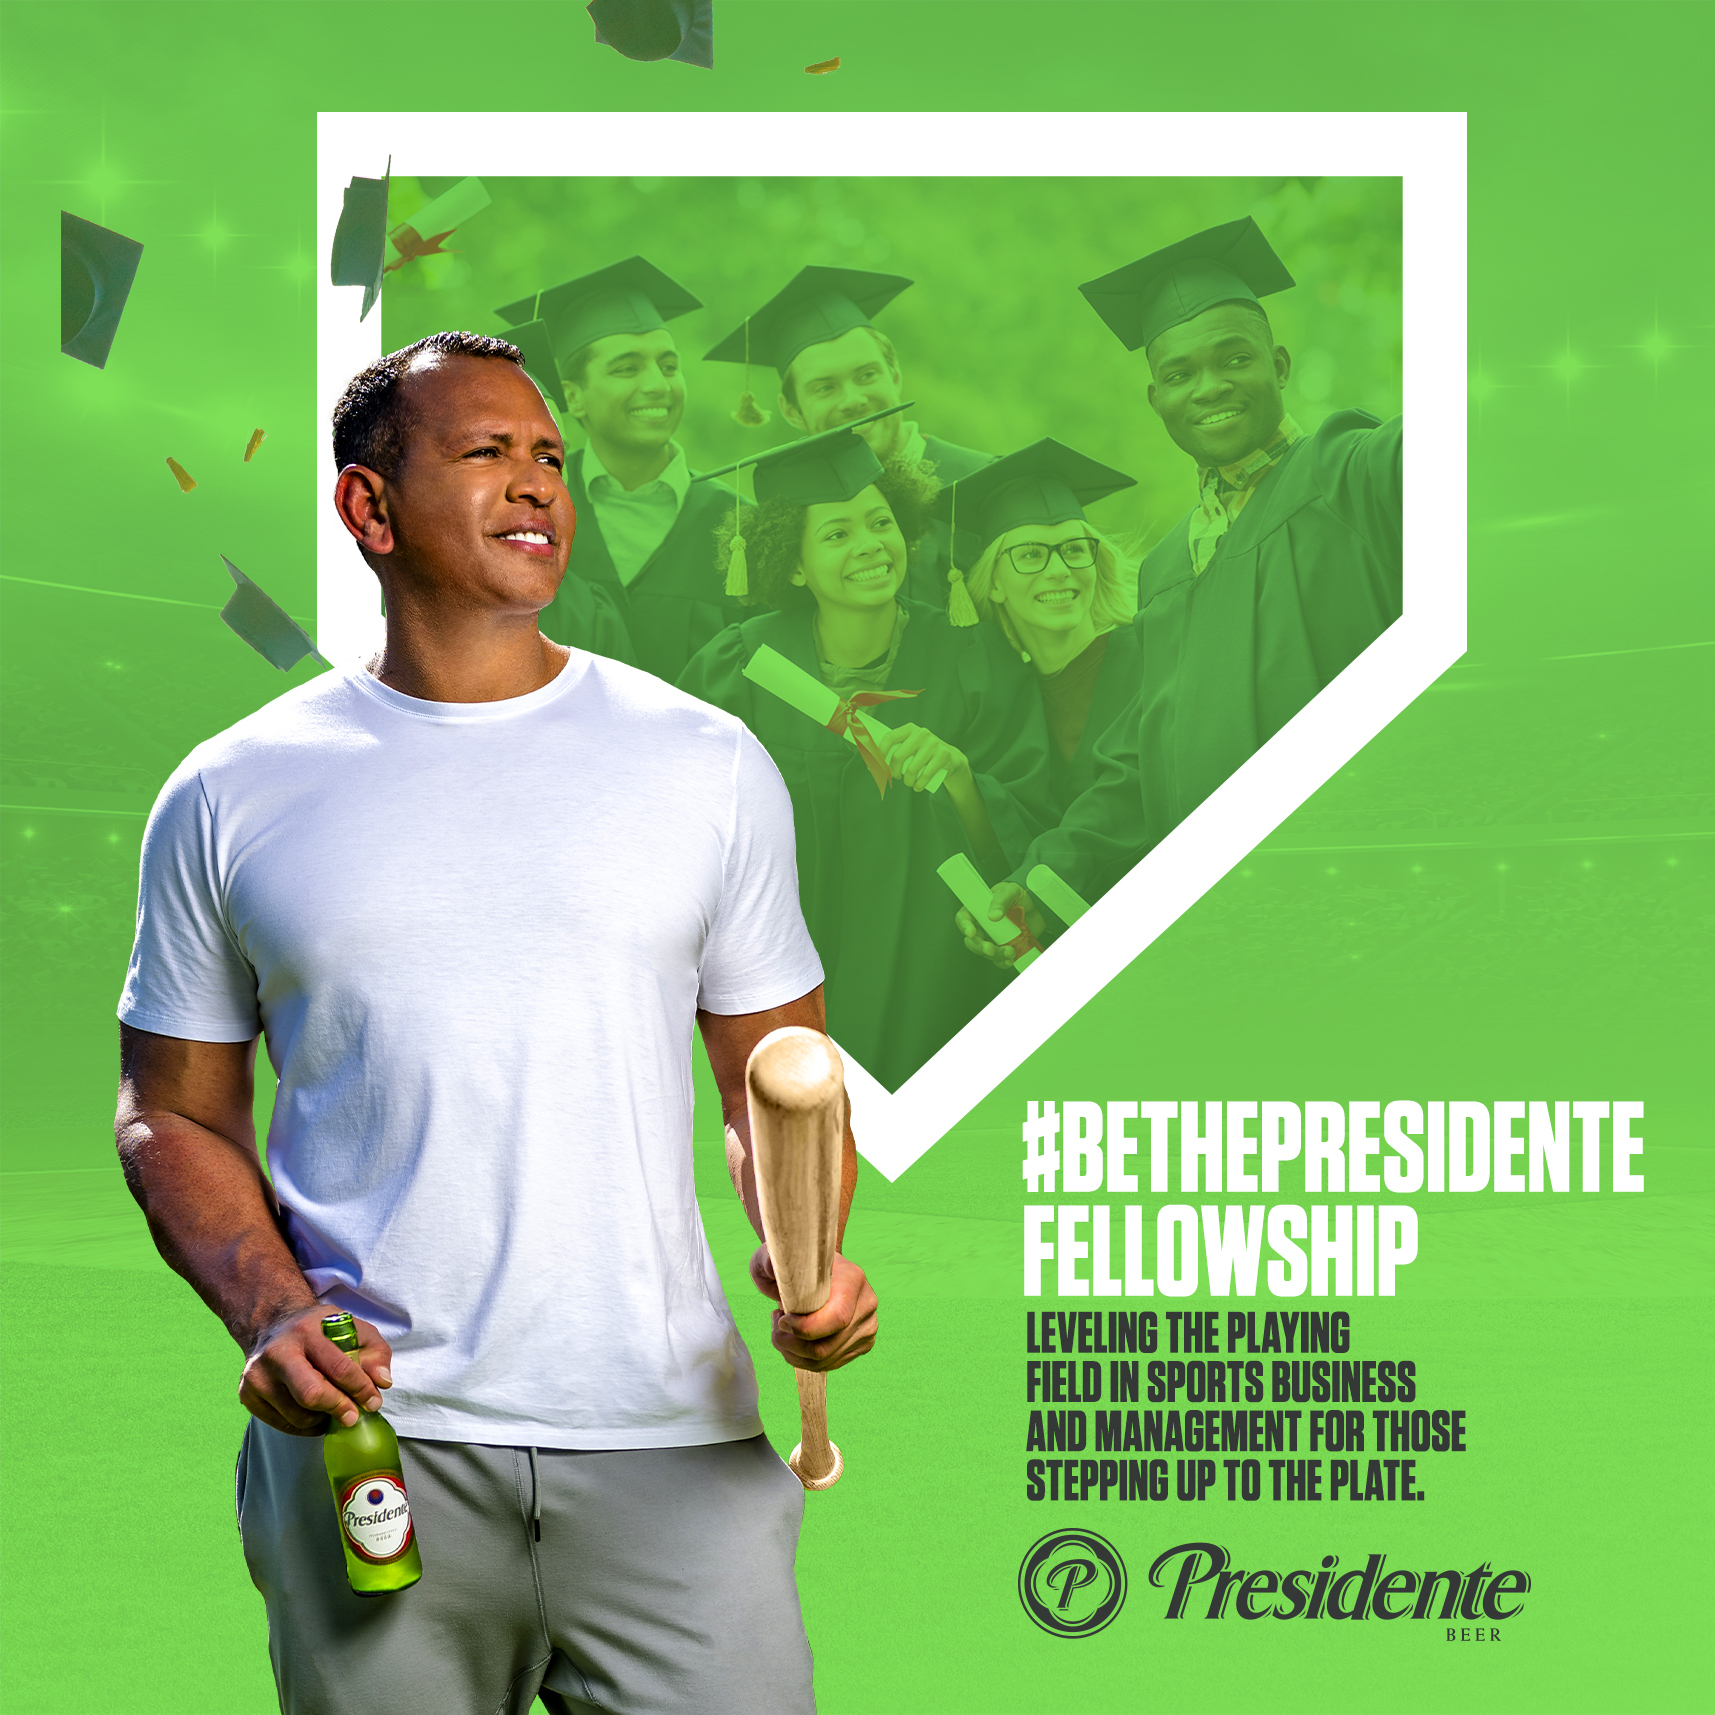 PRESIDENTE LAUNCHES NEW INITIATIVE TO FUEL GREATER HISPANIC REPRESENTATION IN SPORTS BUSINESS